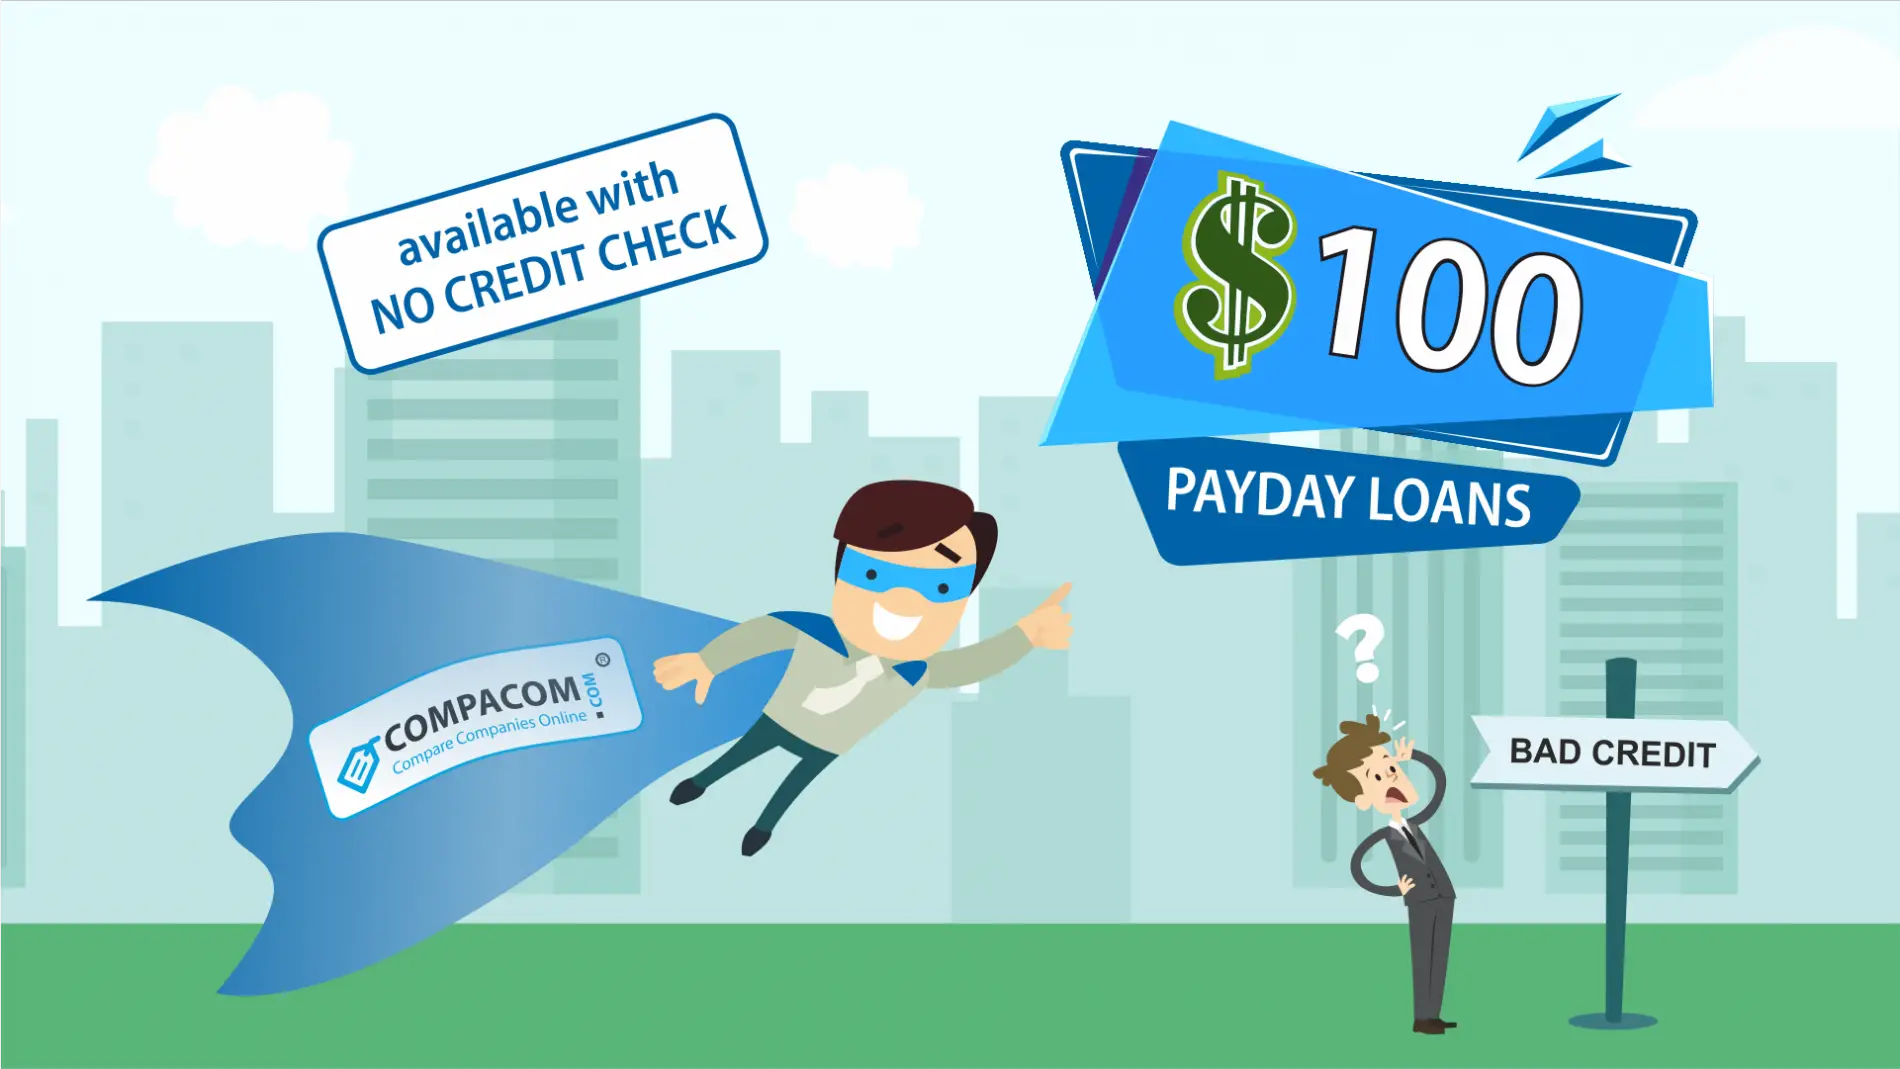 $100 Payday Loans Same Day Even for Bad Credit